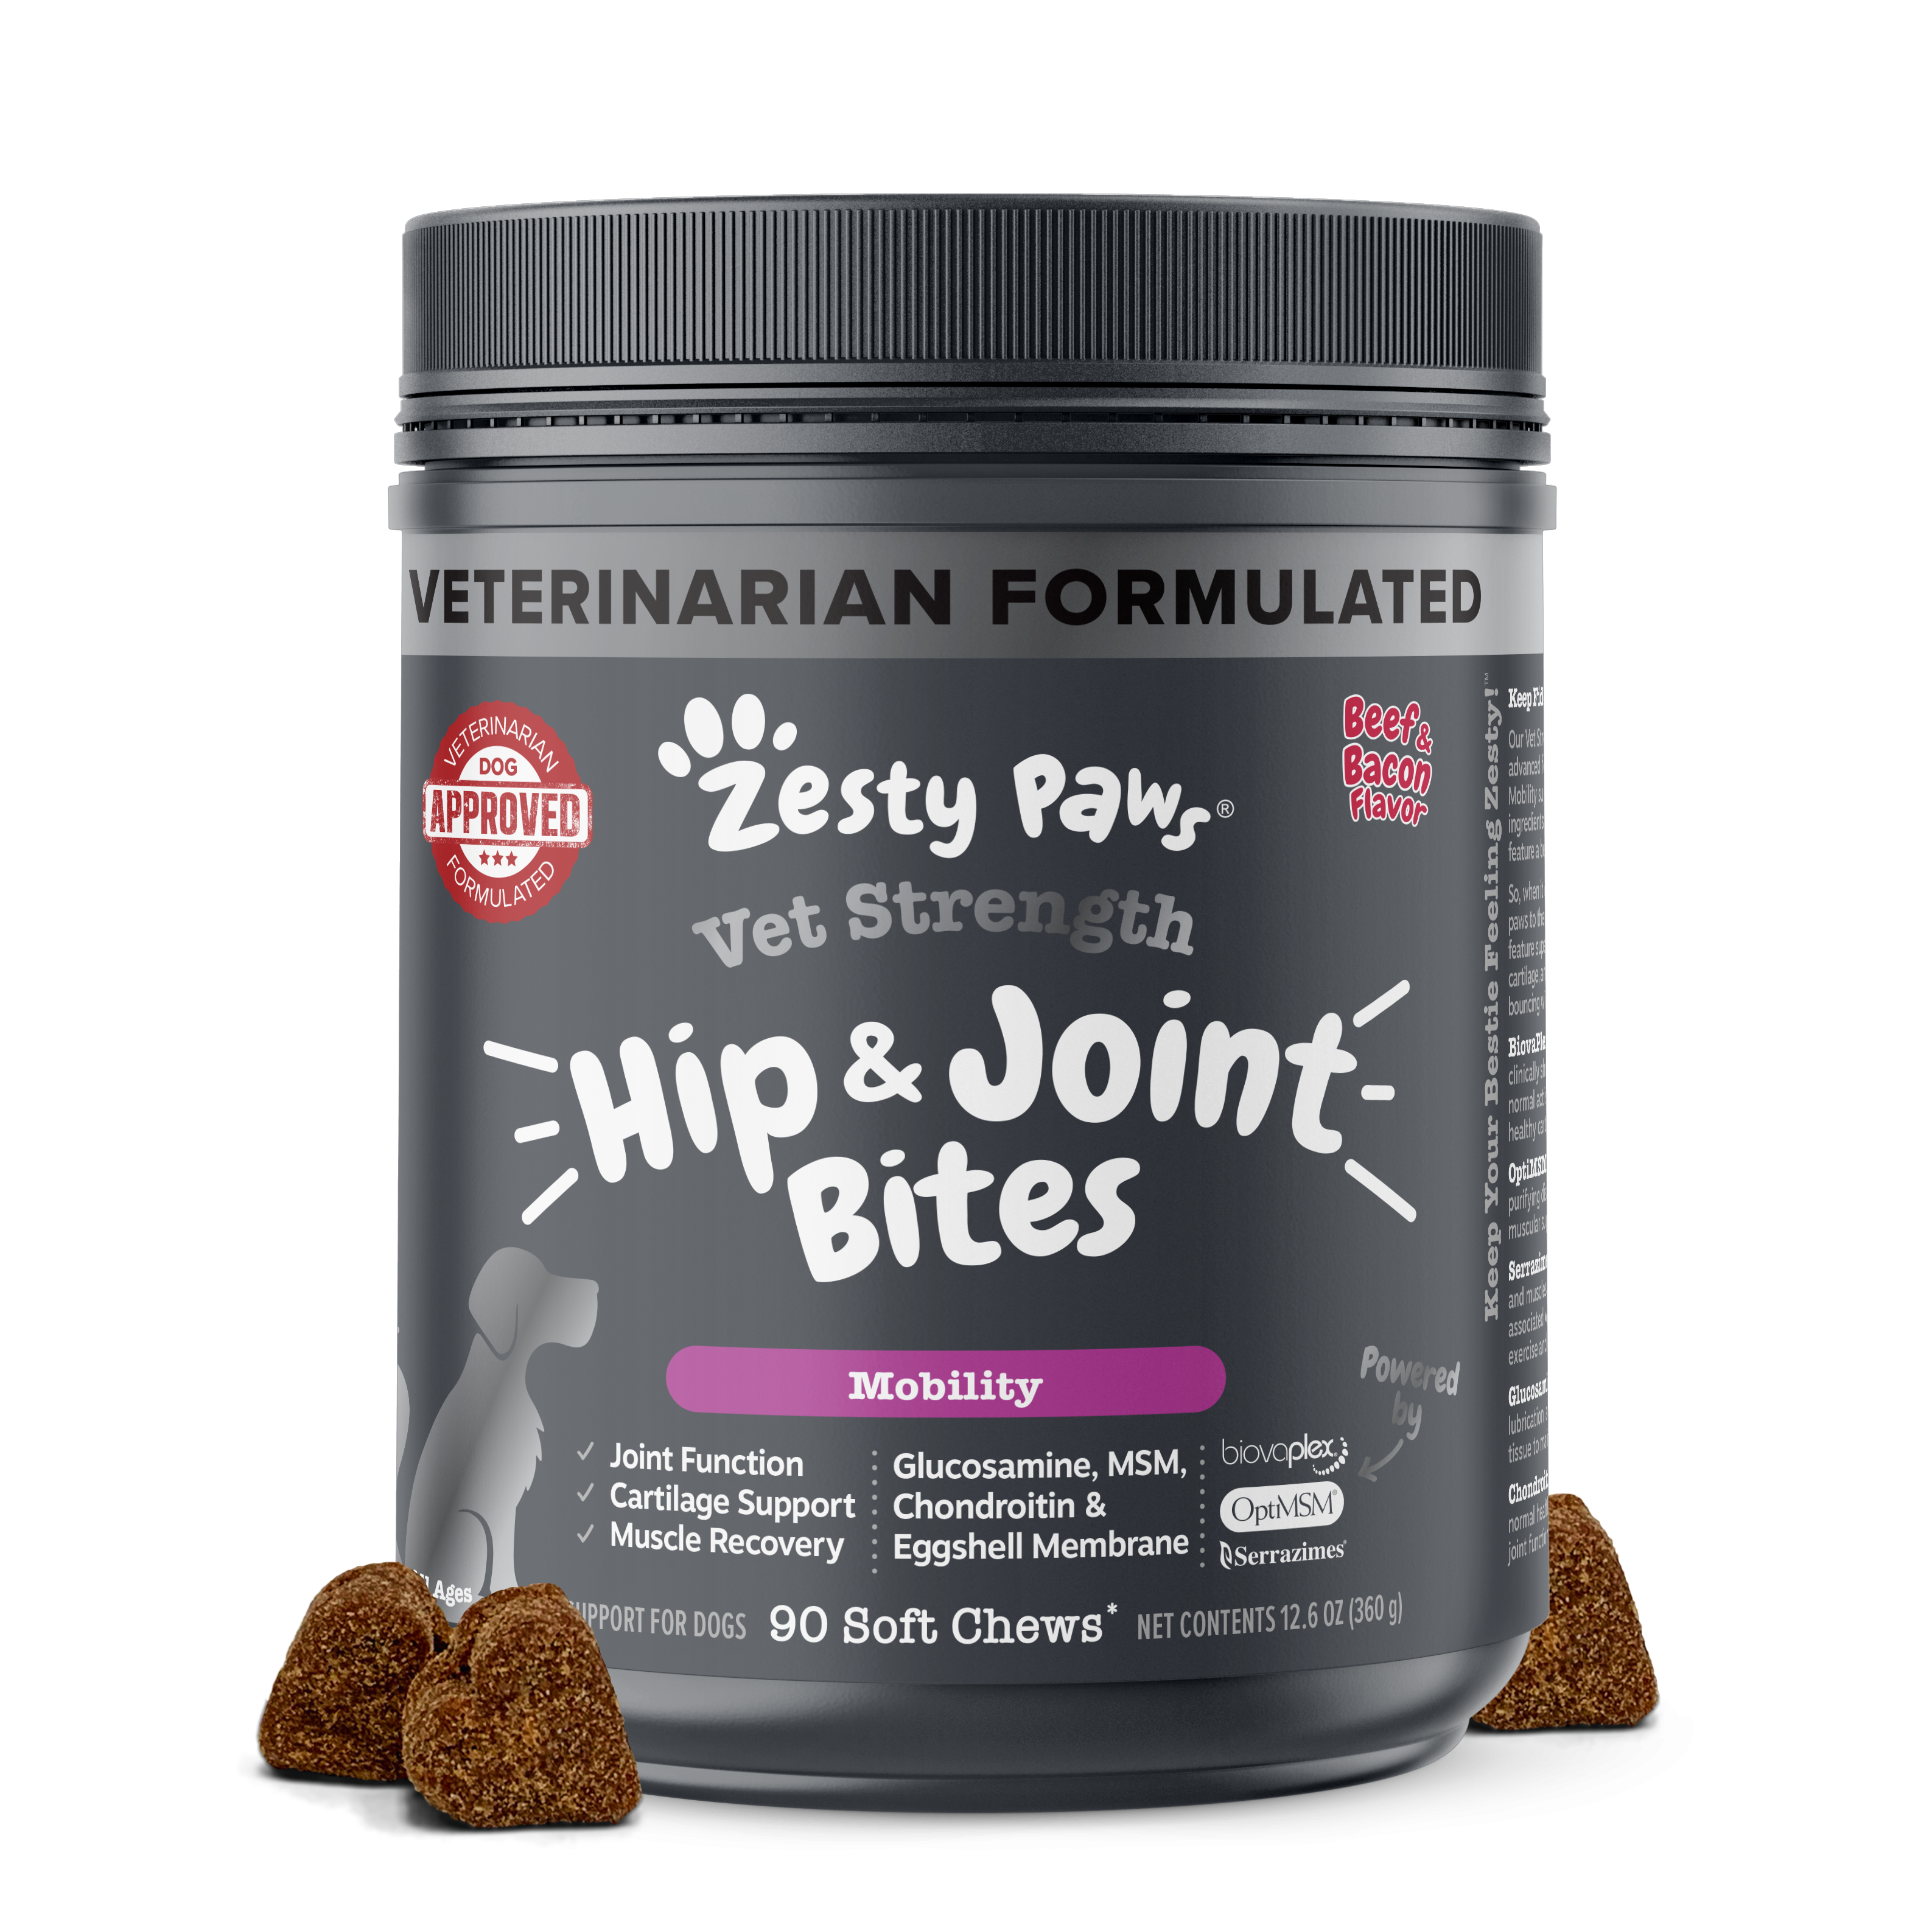 Vet Strength Hip & Joint Mobility Bites for Dogs - Supreme Hip & Joint Support